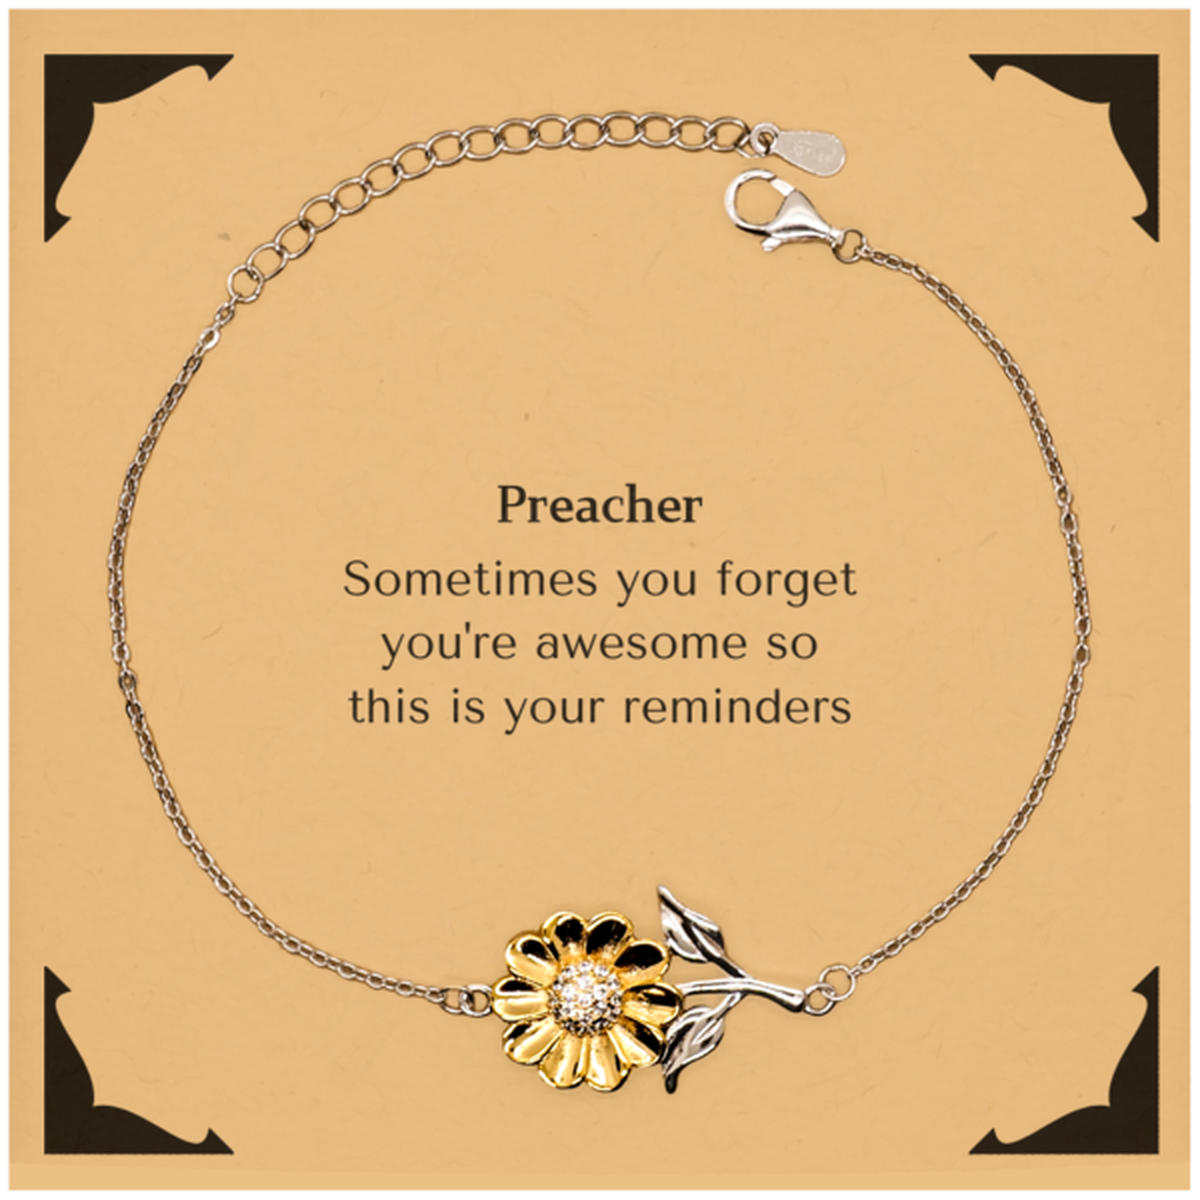 Sentimental Preacher Sunflower Bracelet, Preacher Sometimes you forget you're awesome so this is your reminders, Graduation Christmas Birthday Gifts for Preacher, Men, Women, Coworkers